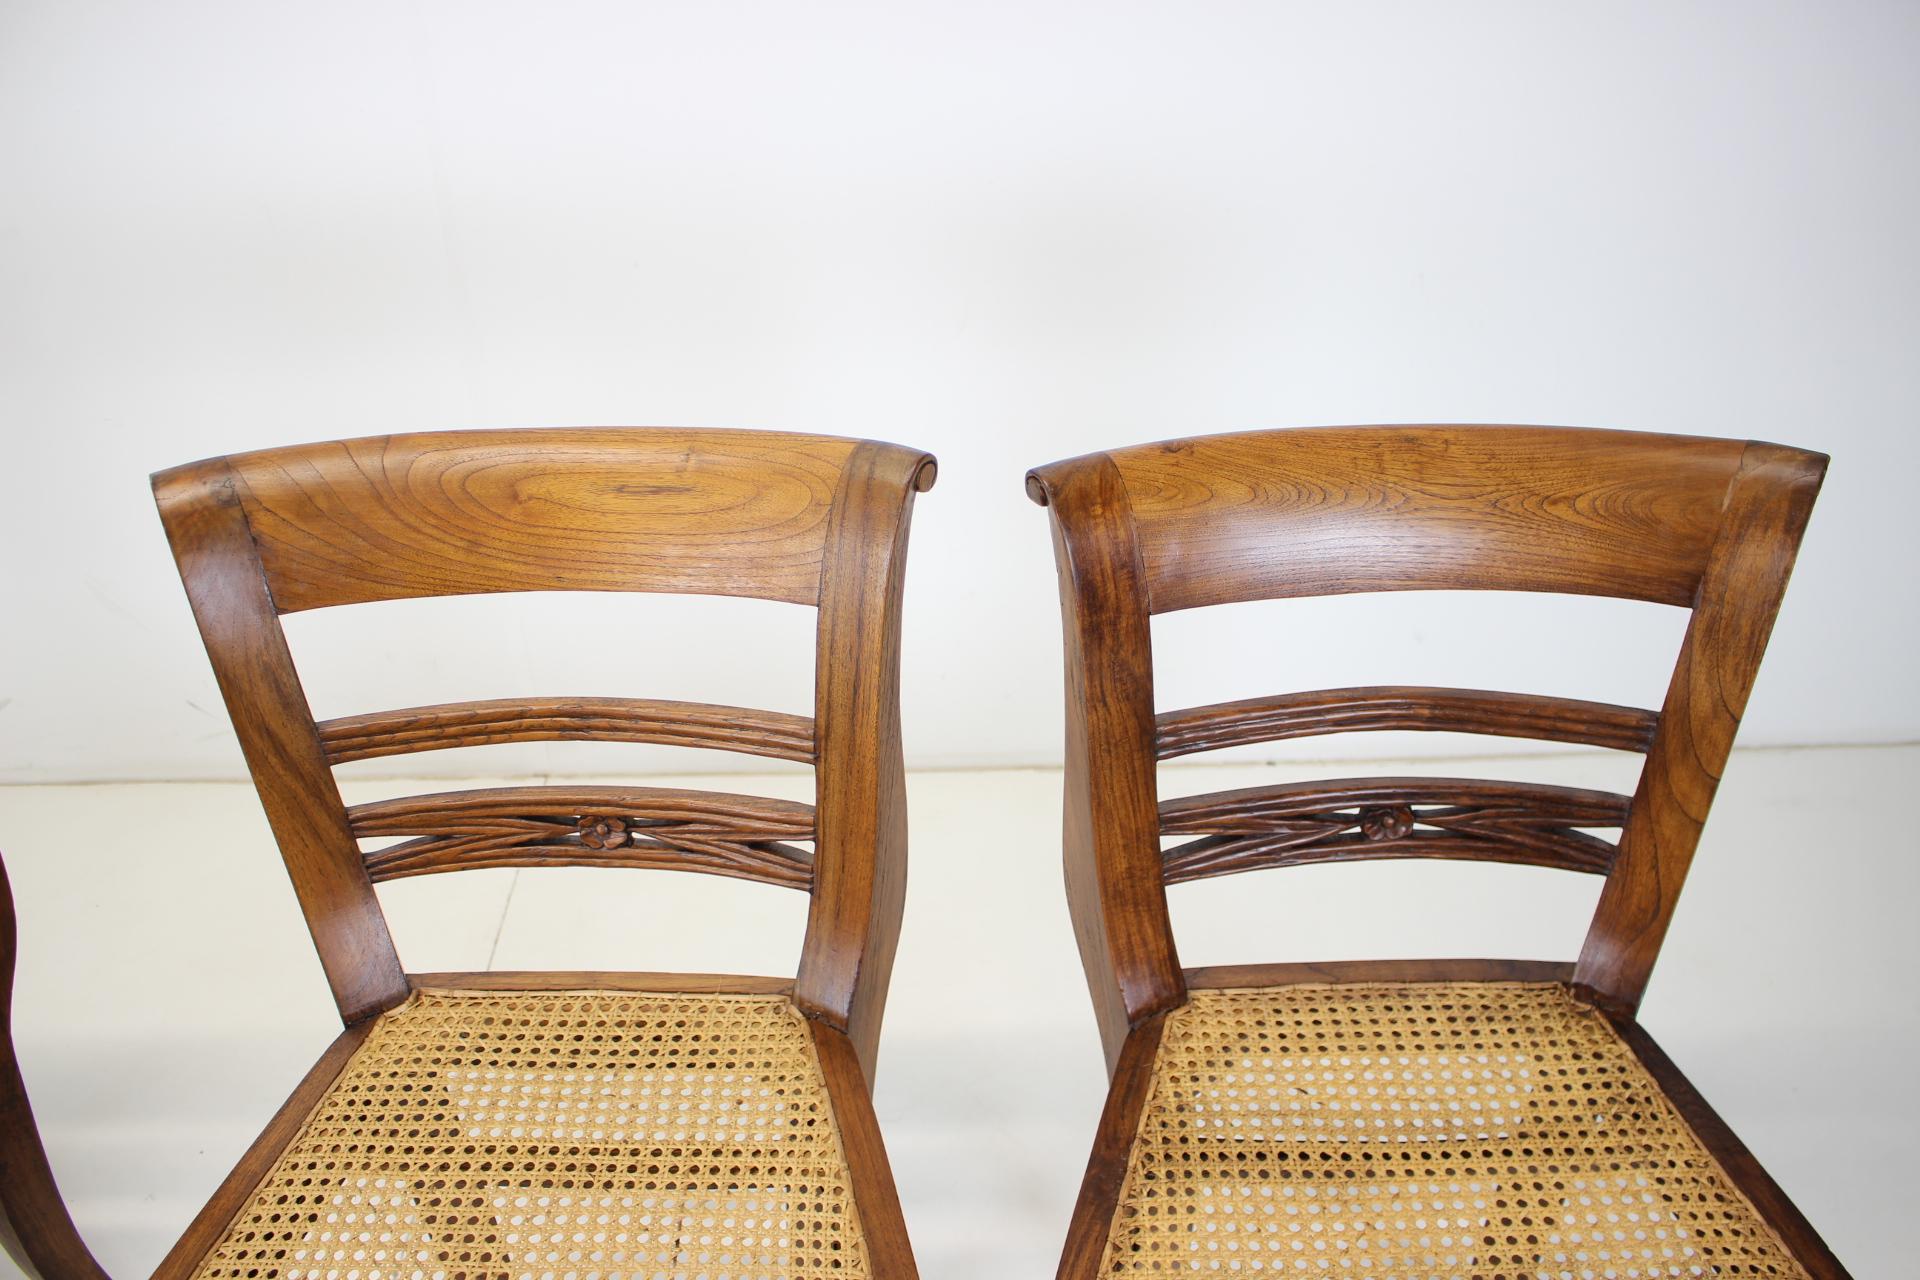 Set of Four Dining Chairs, Made of Solid Wood, 1950s, Czechoslovakia For Sale 5